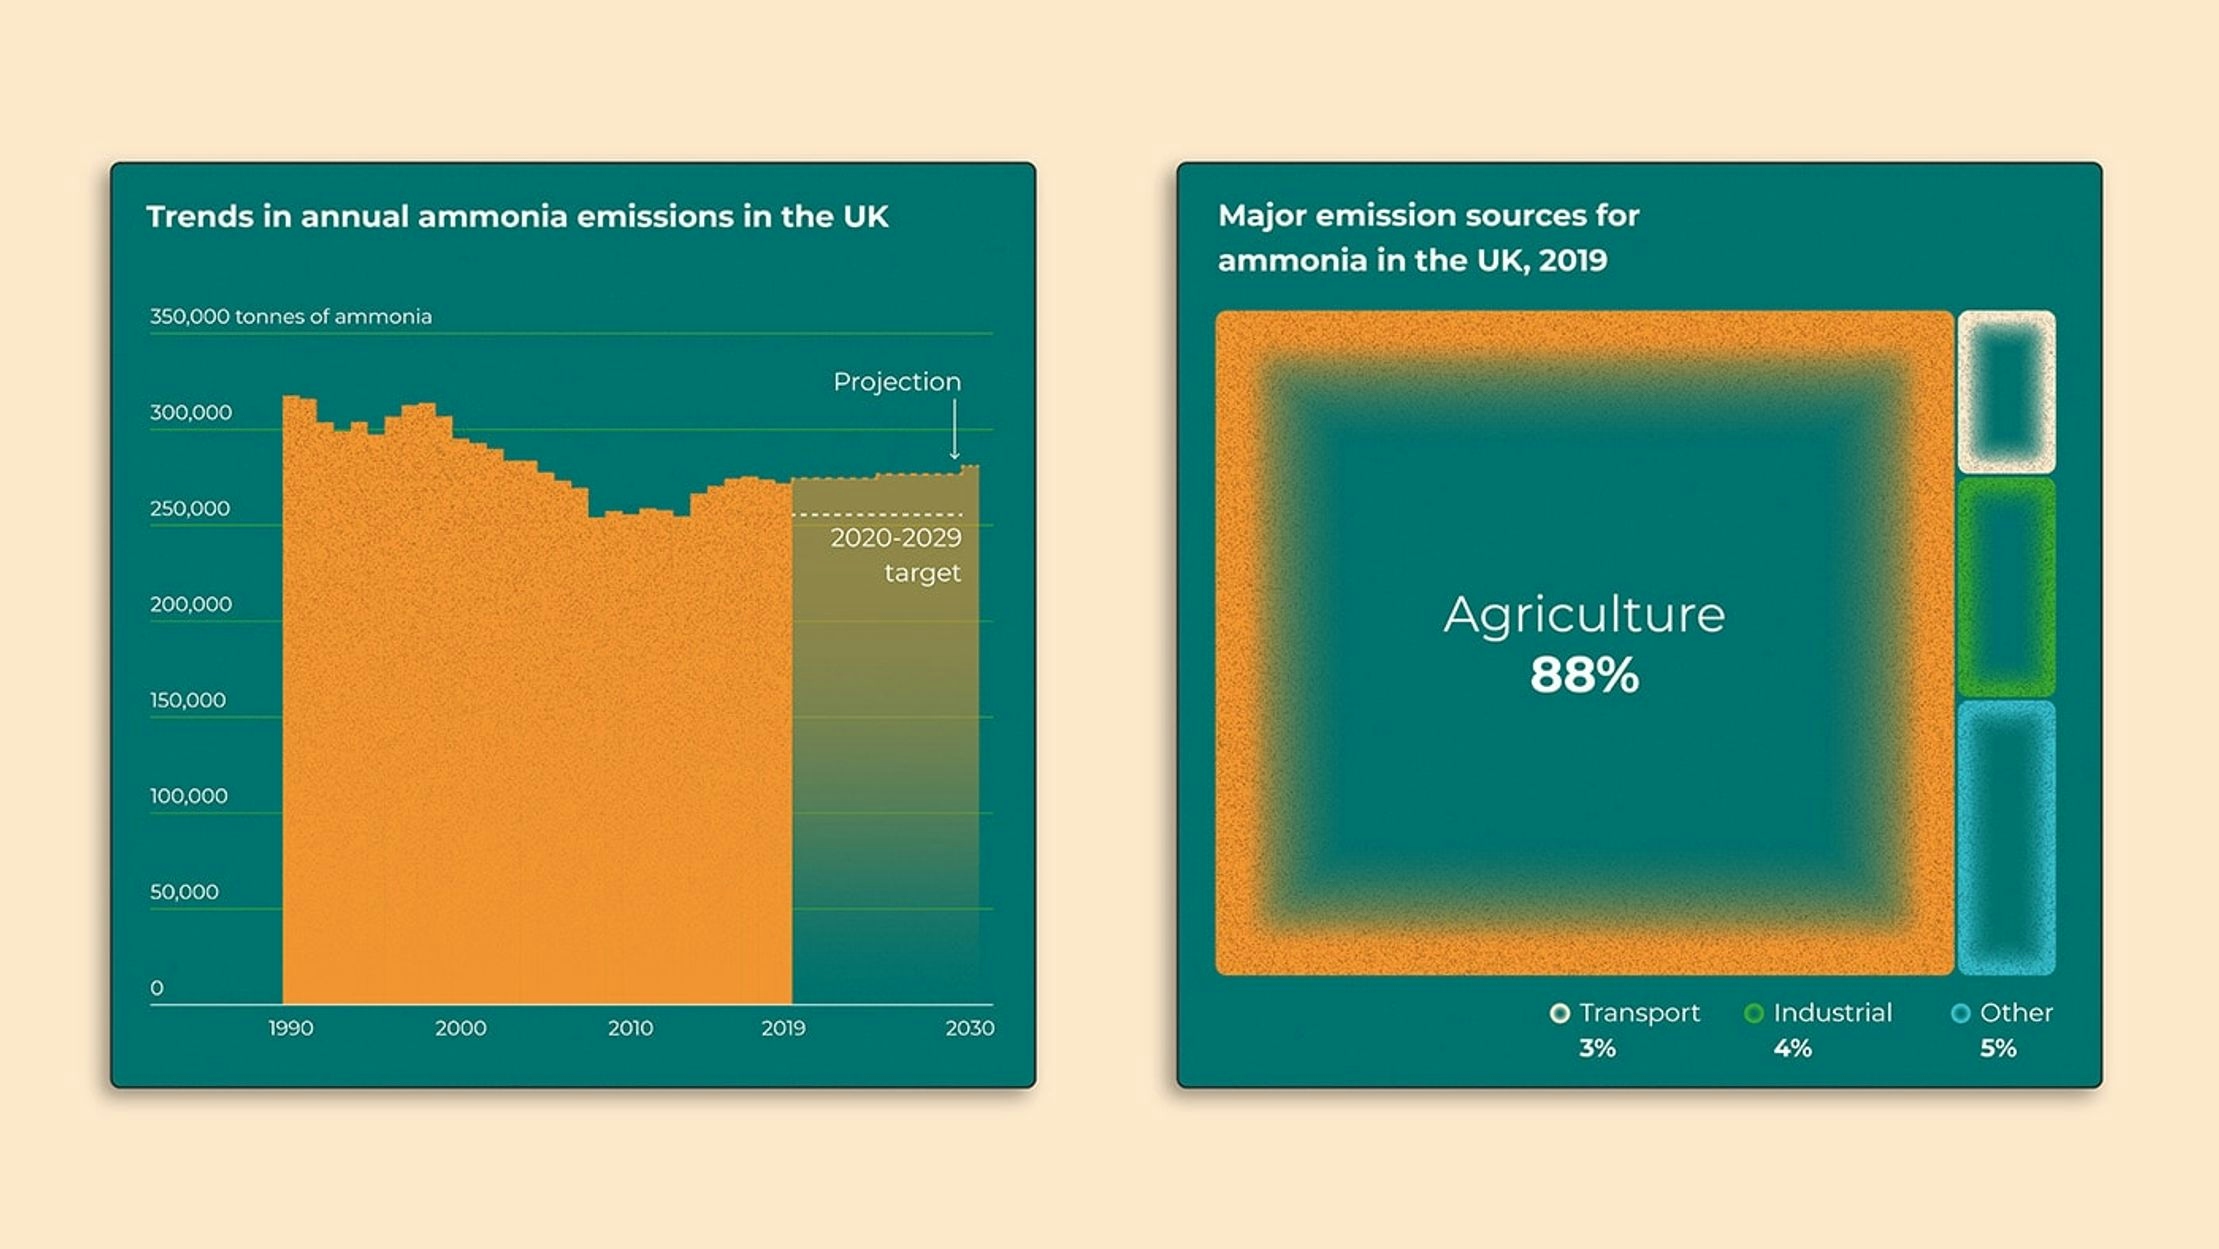 Two data visualizations used in the UKCEH video. One is a bar chart tracking ammonia emissions in the UK with a projection to 2030. The other is a tree map showing the mejor emission sources of ammonia in the UK in 2019. The vast majority, 88% is from agriculture.